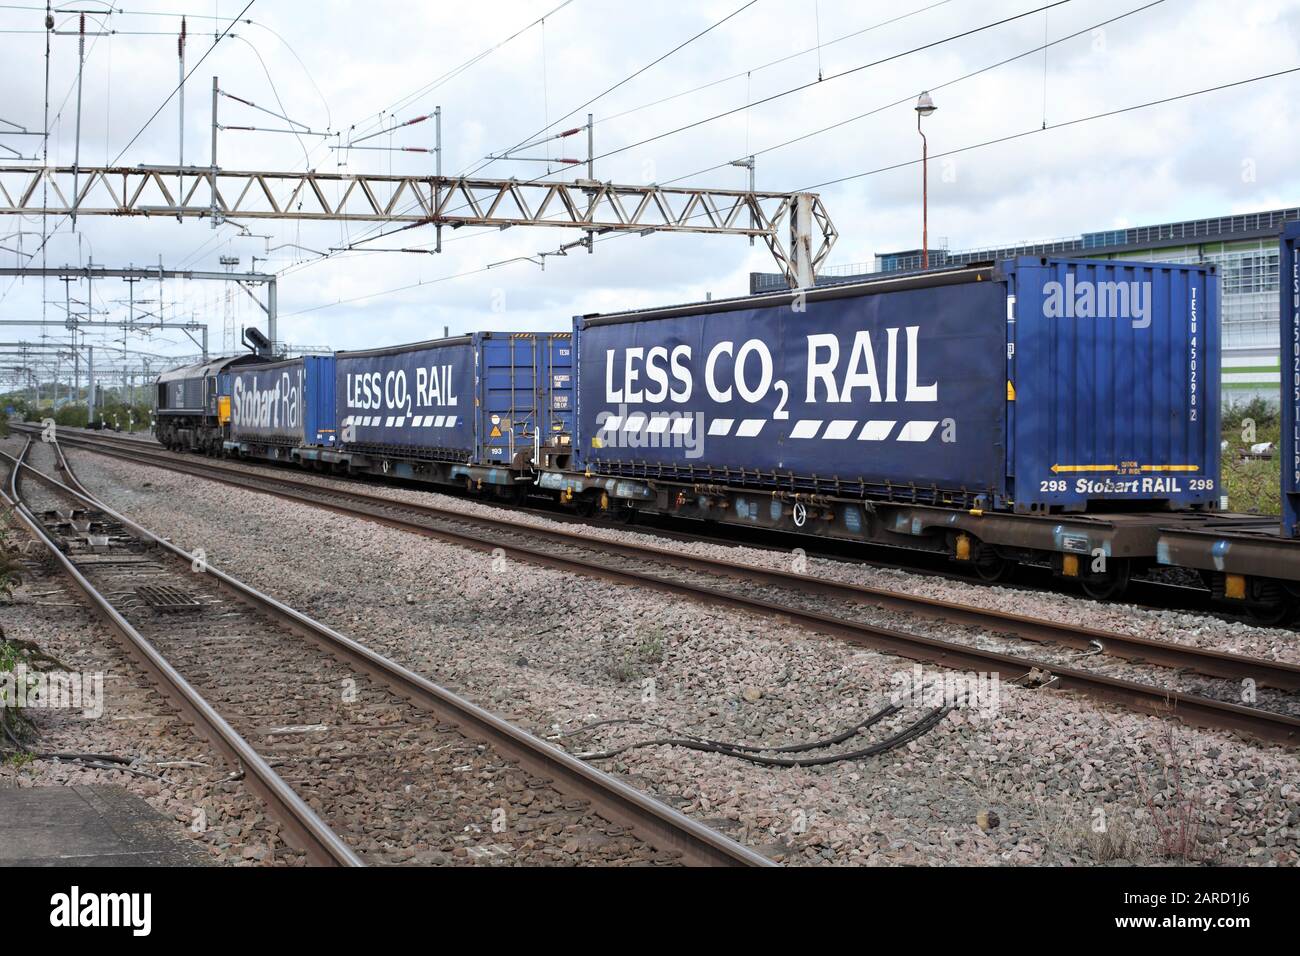 A train of freight containers publicising the environmental benefits of rail transport over road - 'LESS CO2...'. Stock Photo